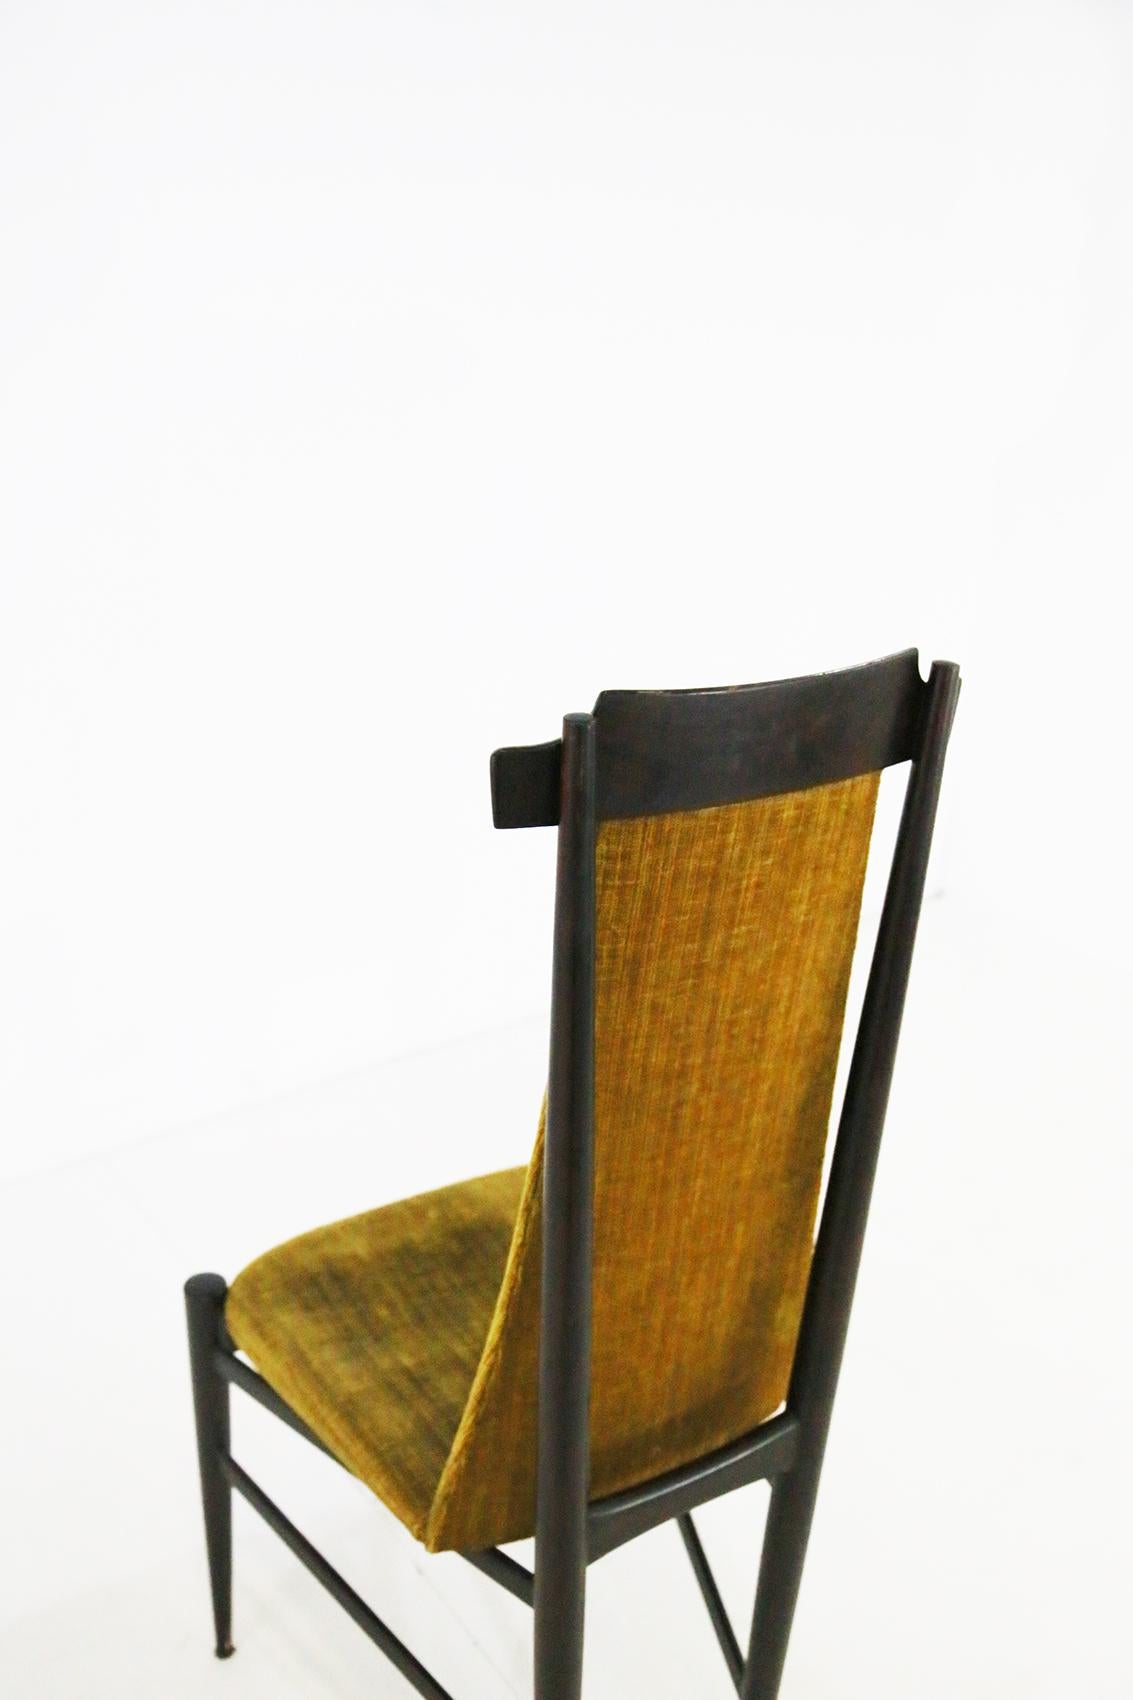 Beautiful set of 6 chairs designed by Sergio Rodrigues for the manufacture Isa Bergamo.
The chairs are made of rosewood and covered with original velvet of the time. The velvet is ribbed in yellow ochre. Very slight scratches can be seen due to age